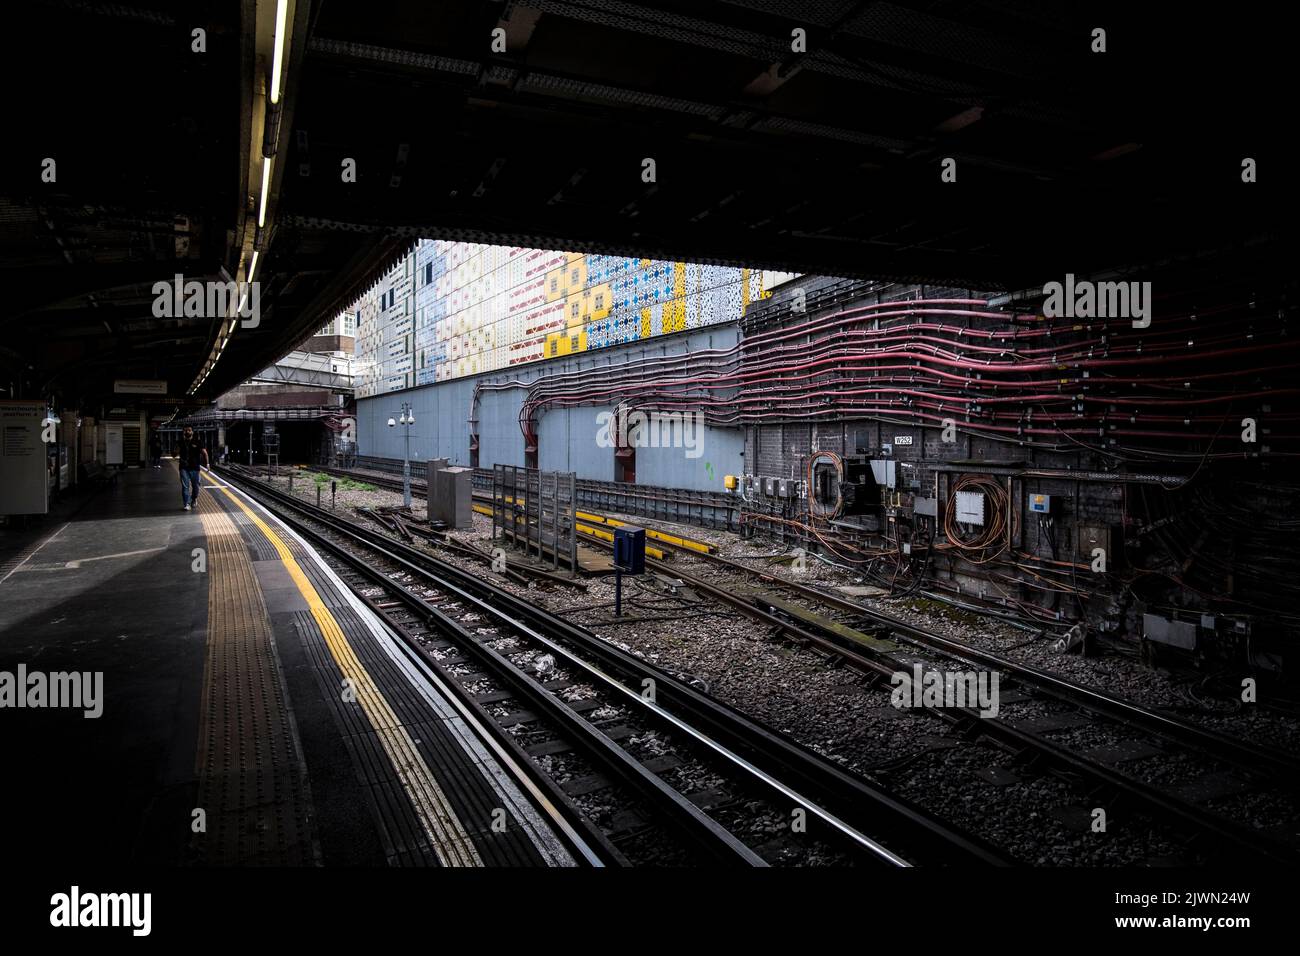 An empty platform and view of the track at Edgware Road station on the London Underground Circle Line Stock Photo